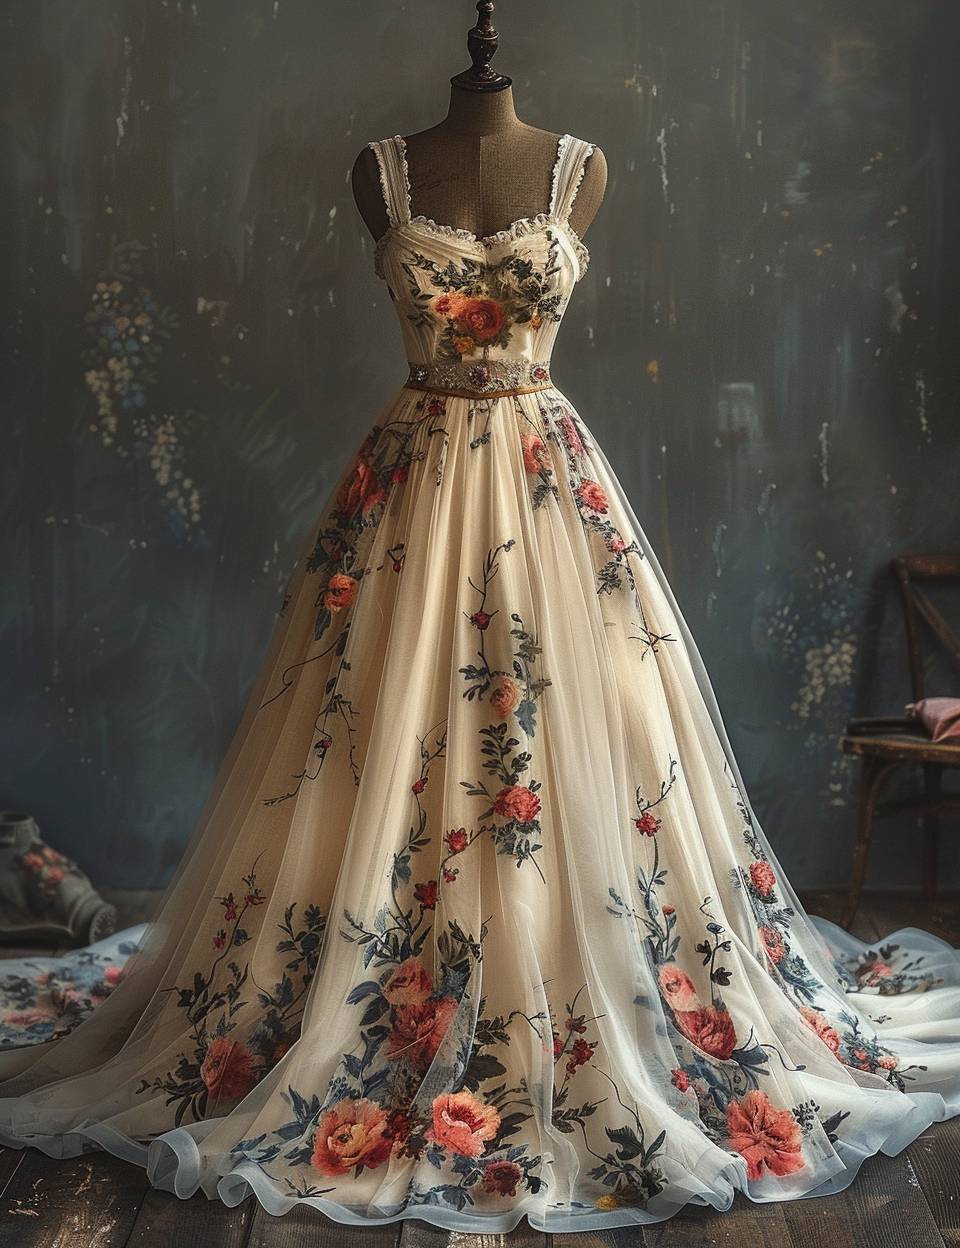 Beautiful Vintage floral wedding dress, watercolor, high detail, HDR, self shadow, unique, intricate detail, hand-painted